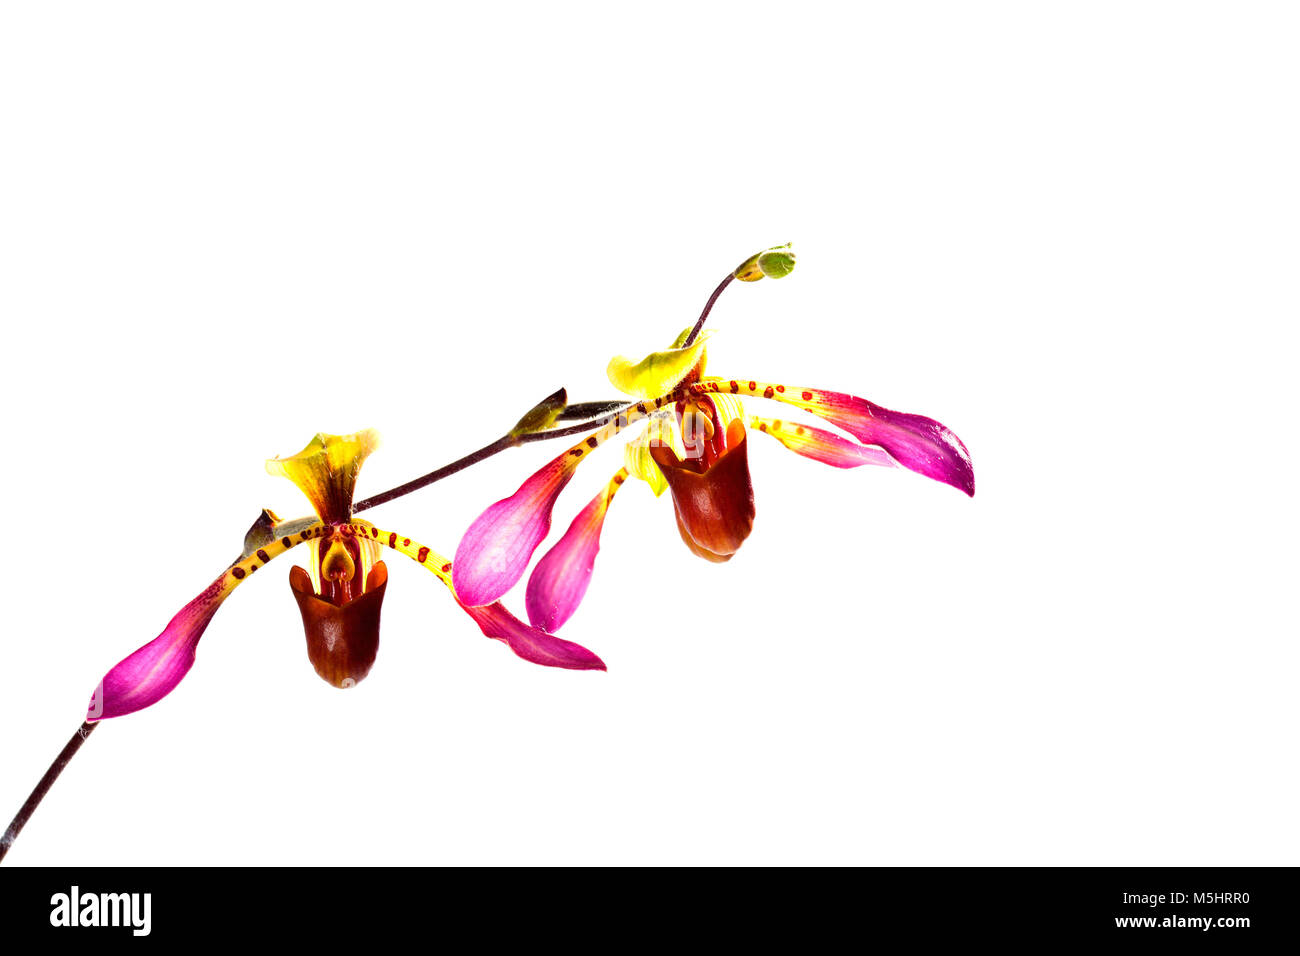 Orchid flower on white background, paphiopedilum. Stock Photo